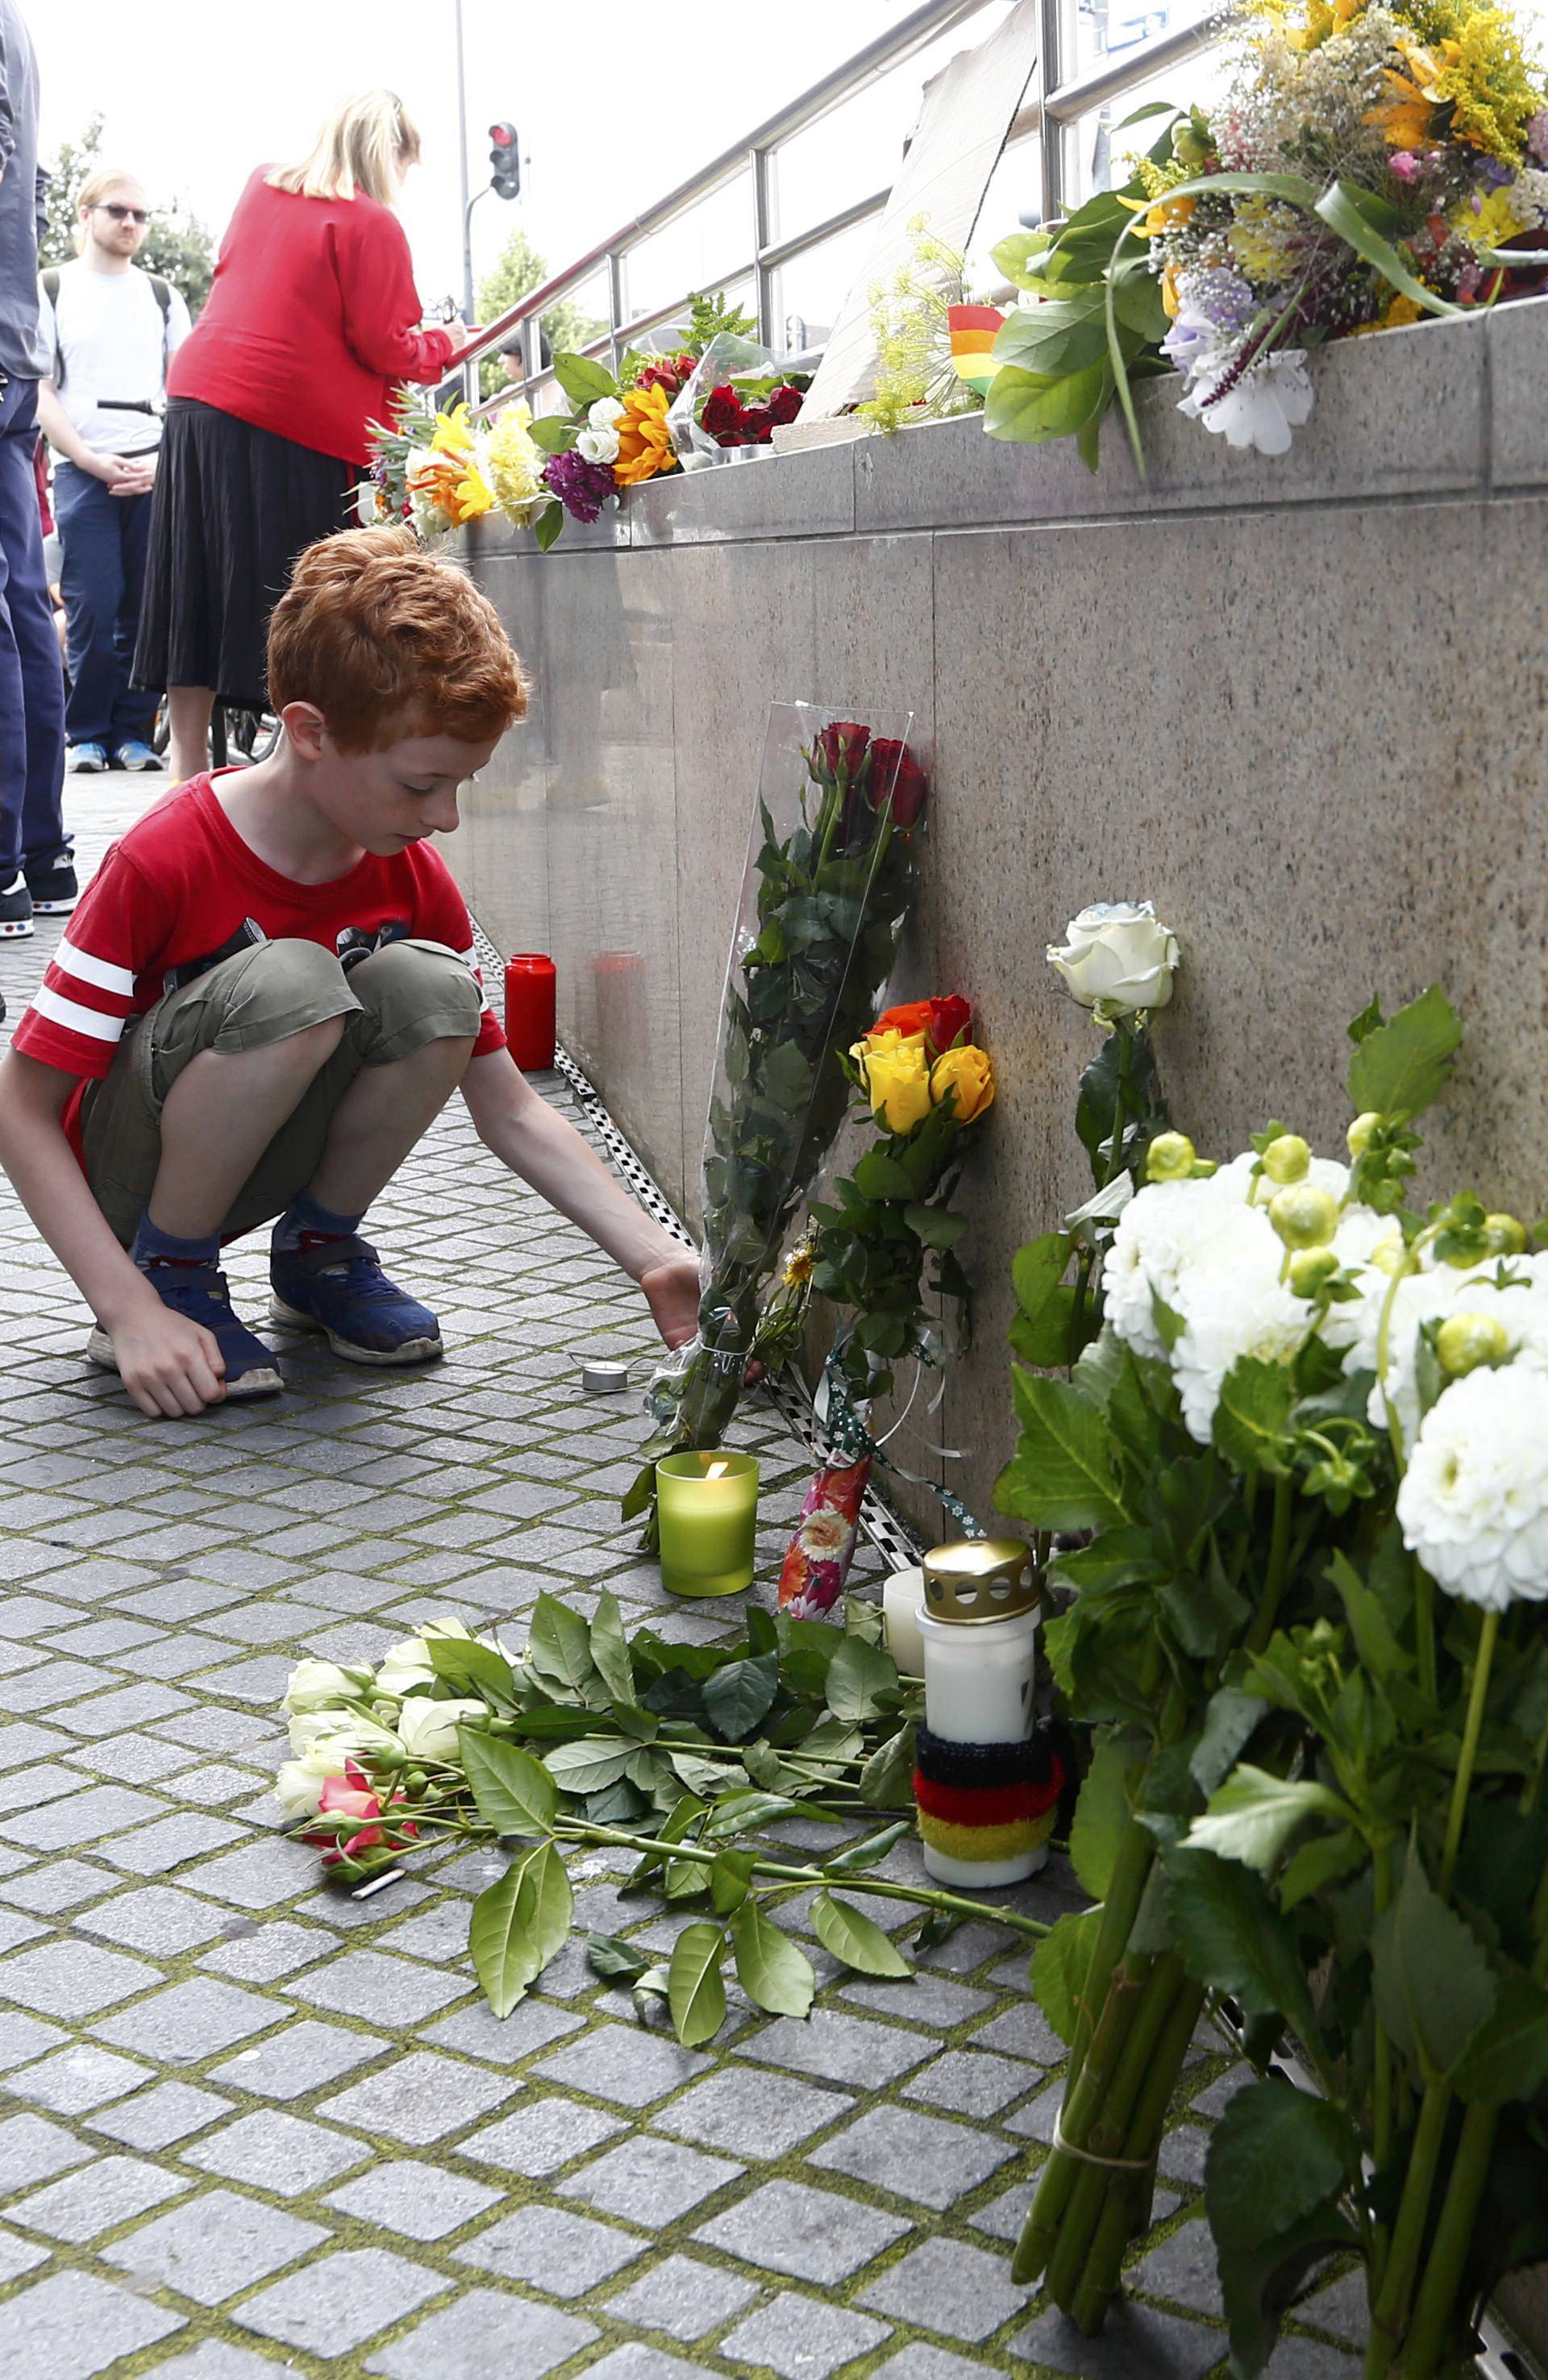 A young boy places flowers near Olympia shopping mall in Munich